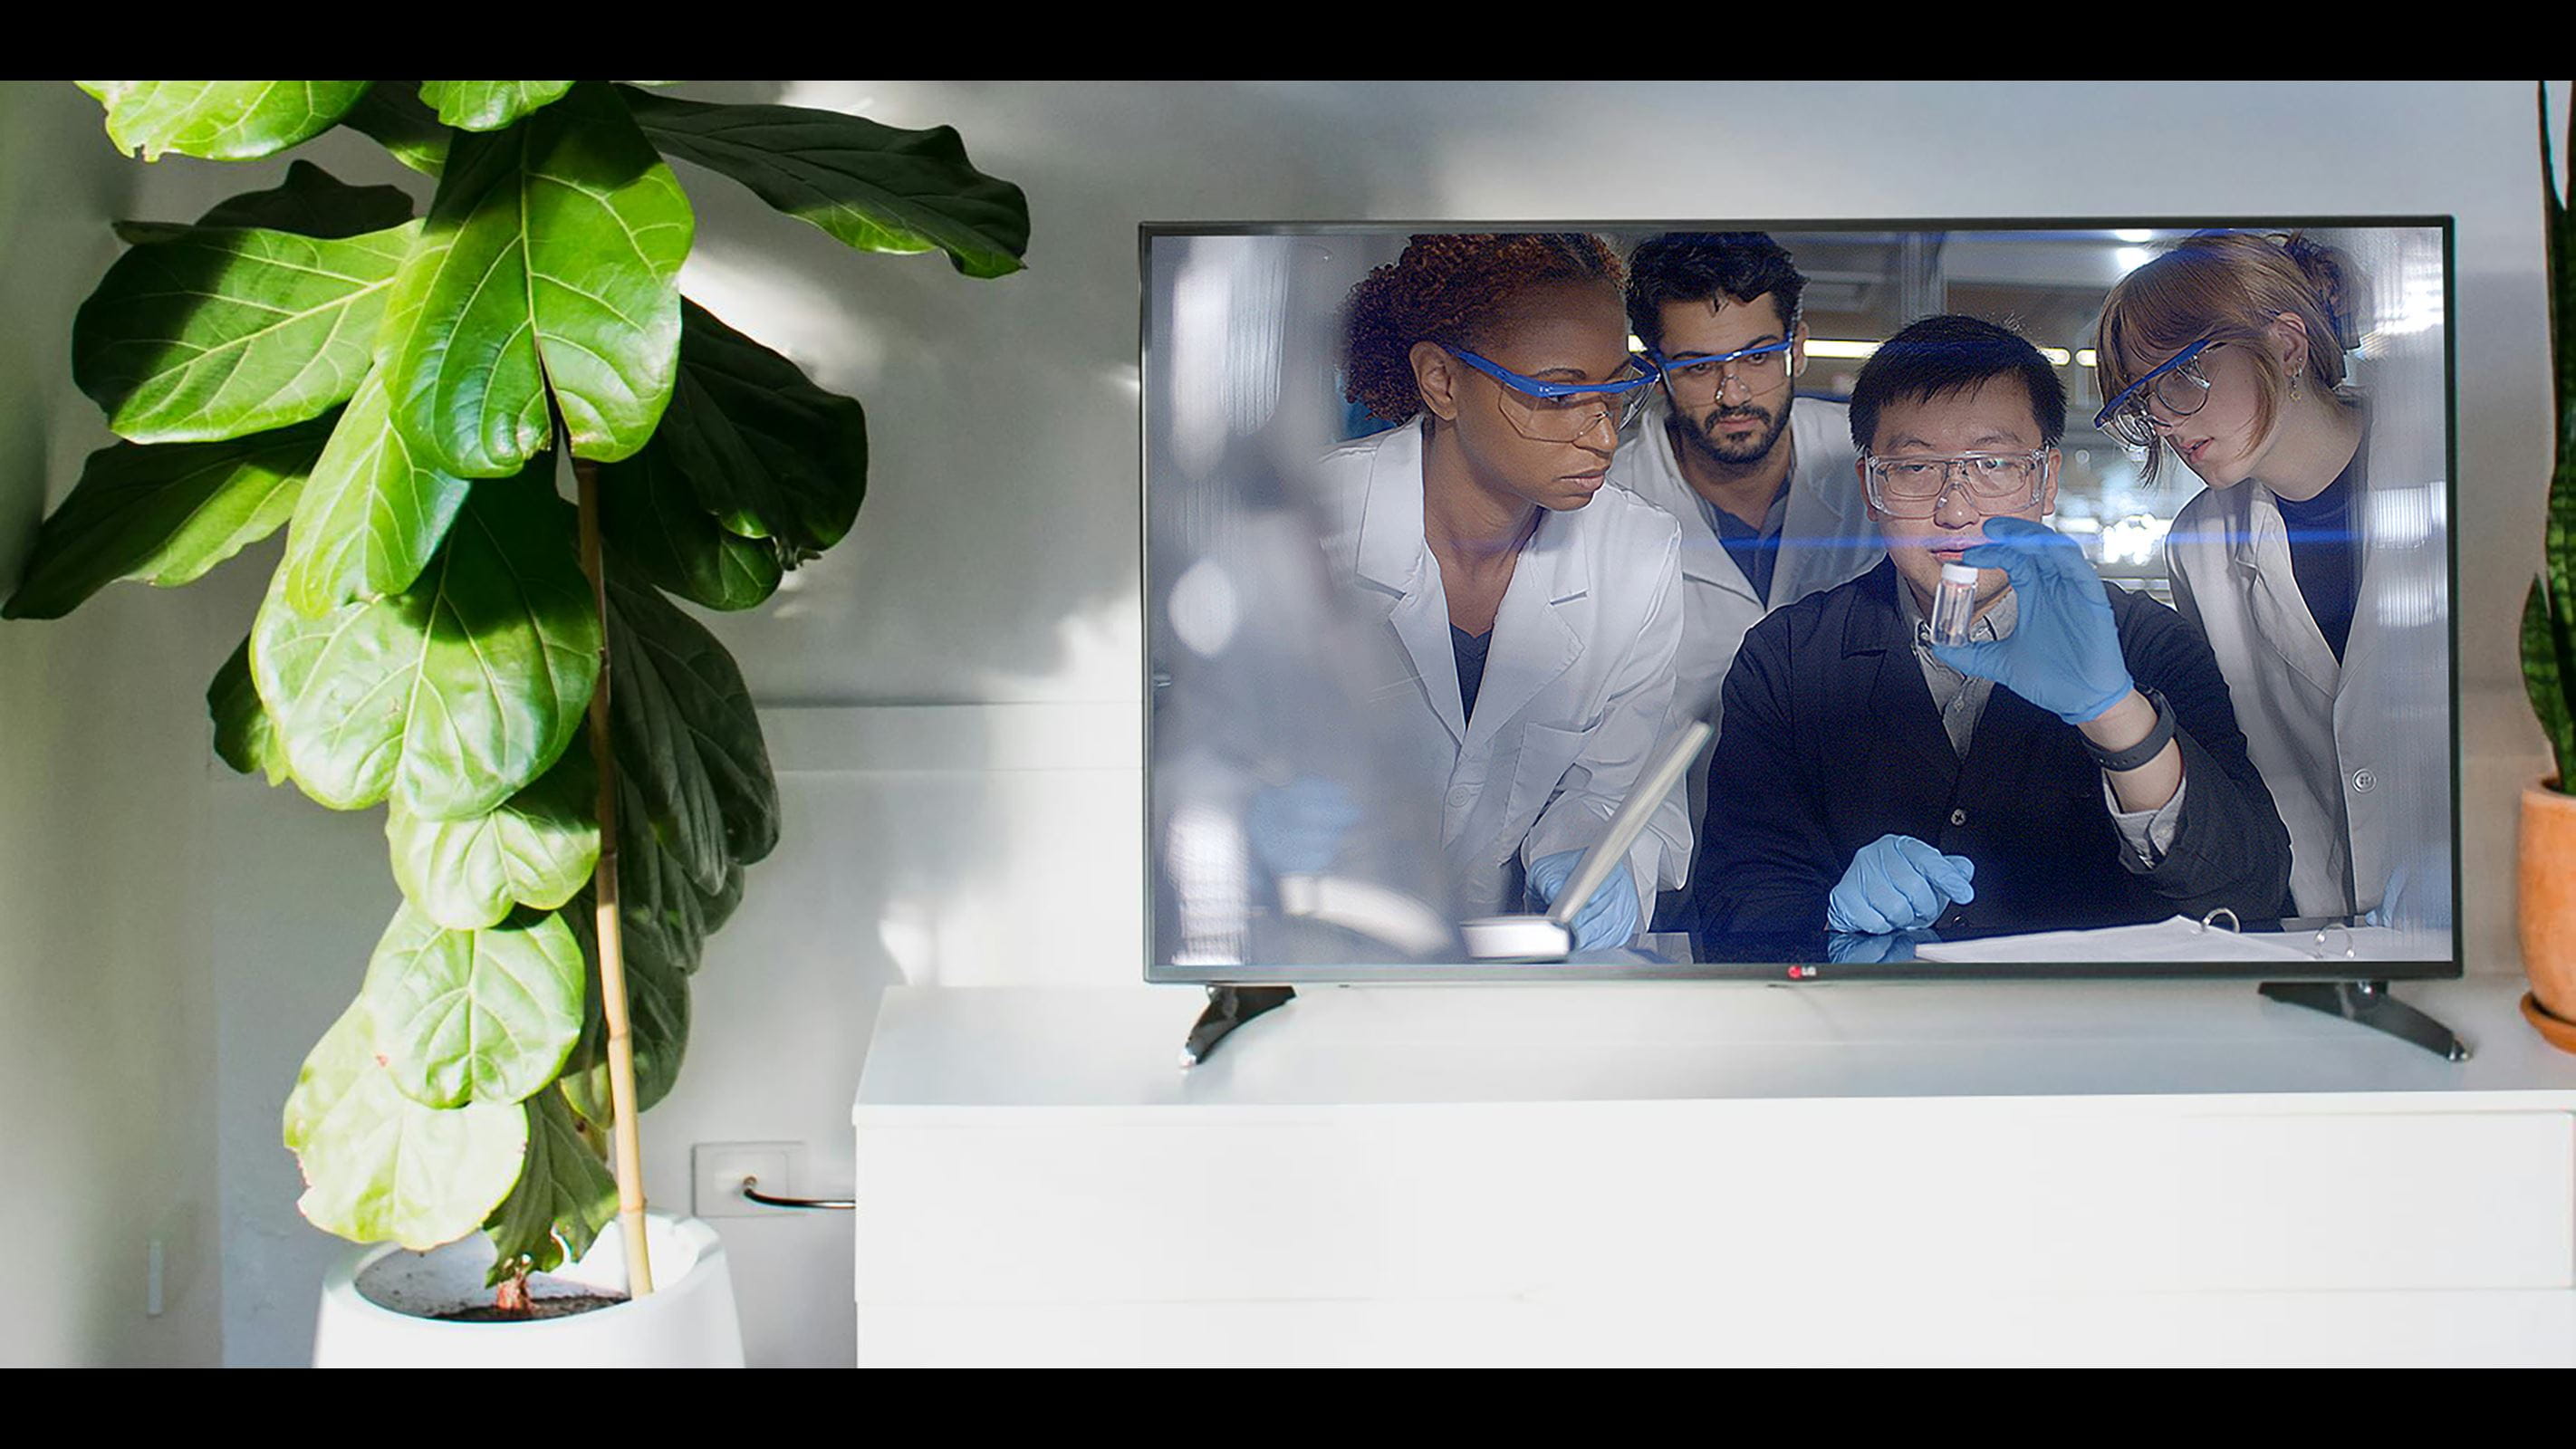 Television screen depicting Drexel students in a laboratory setting